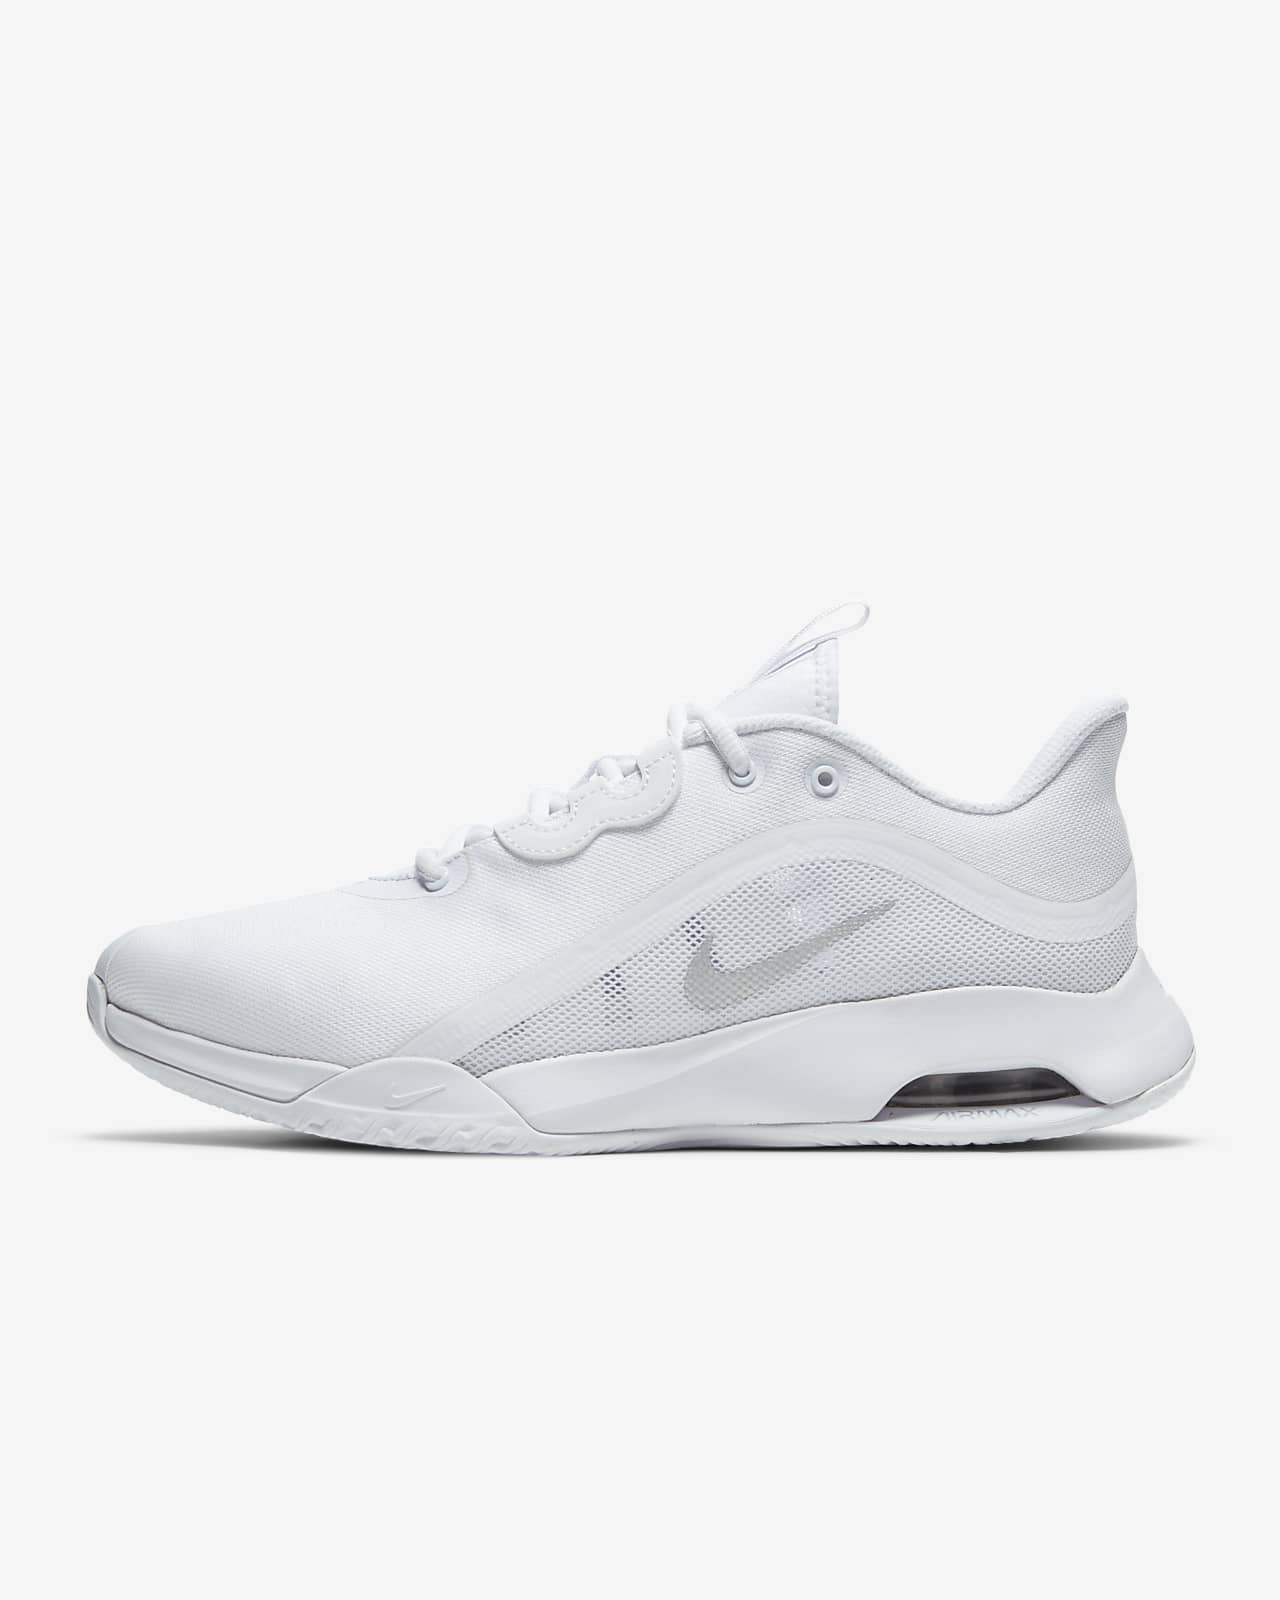 nike shoes volleyball women's